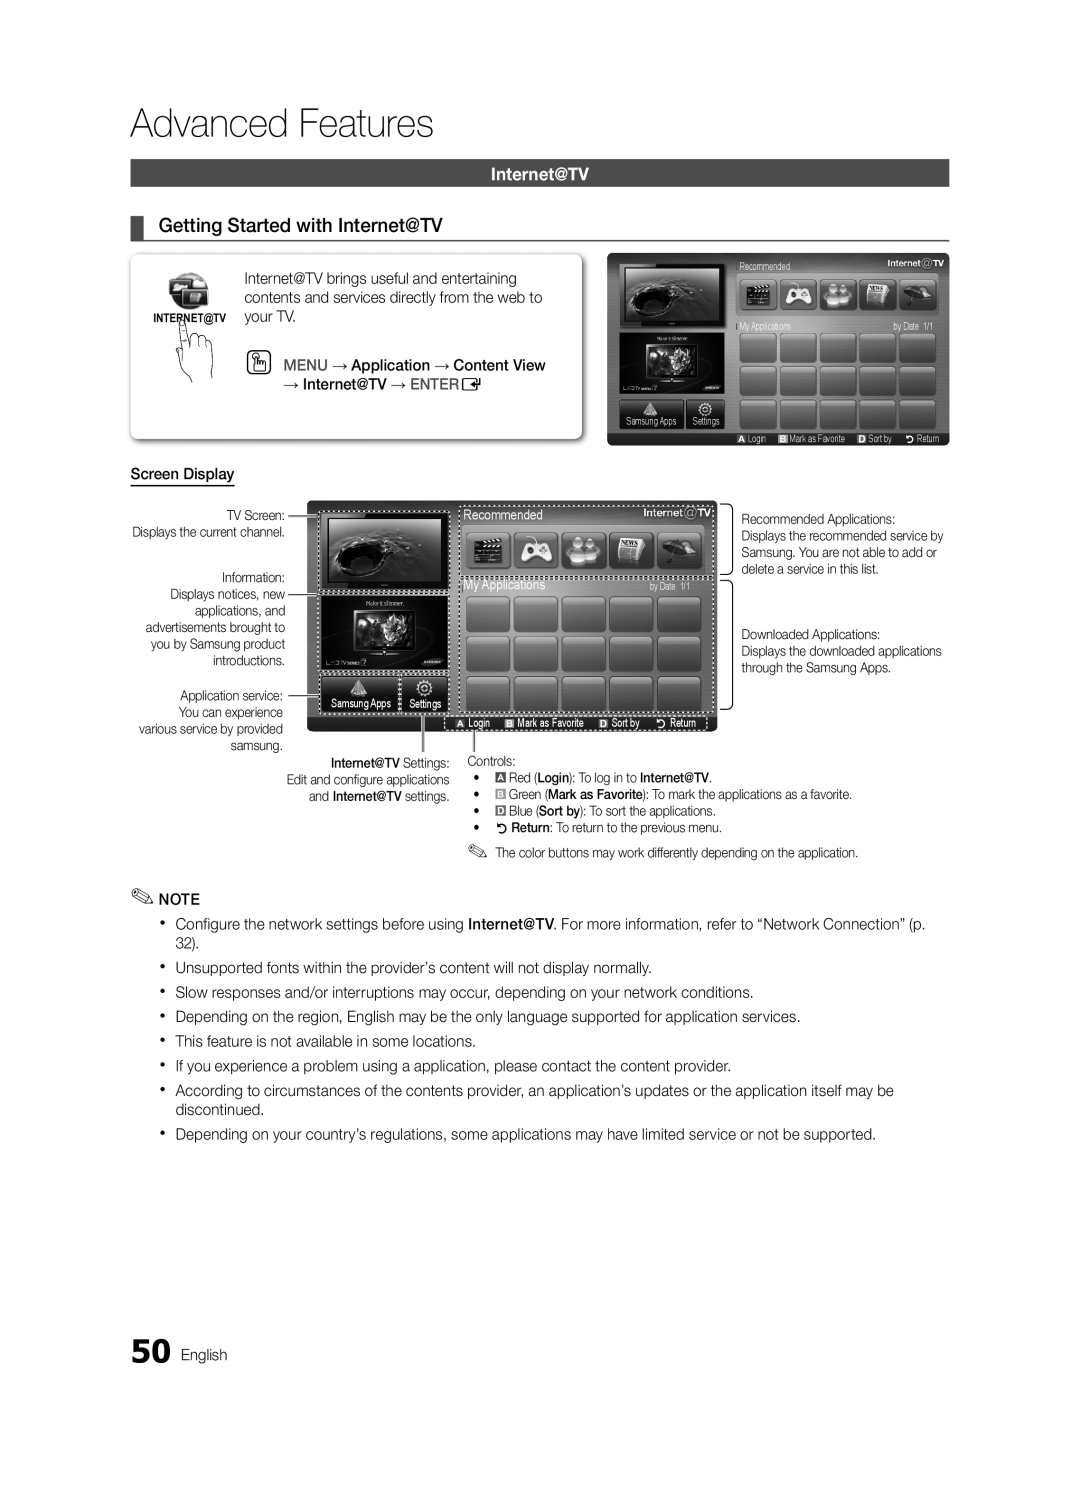 Samsung BN68-03088A-01, Series C9 user manual Getting Started with Internet@TV, Advanced Features 